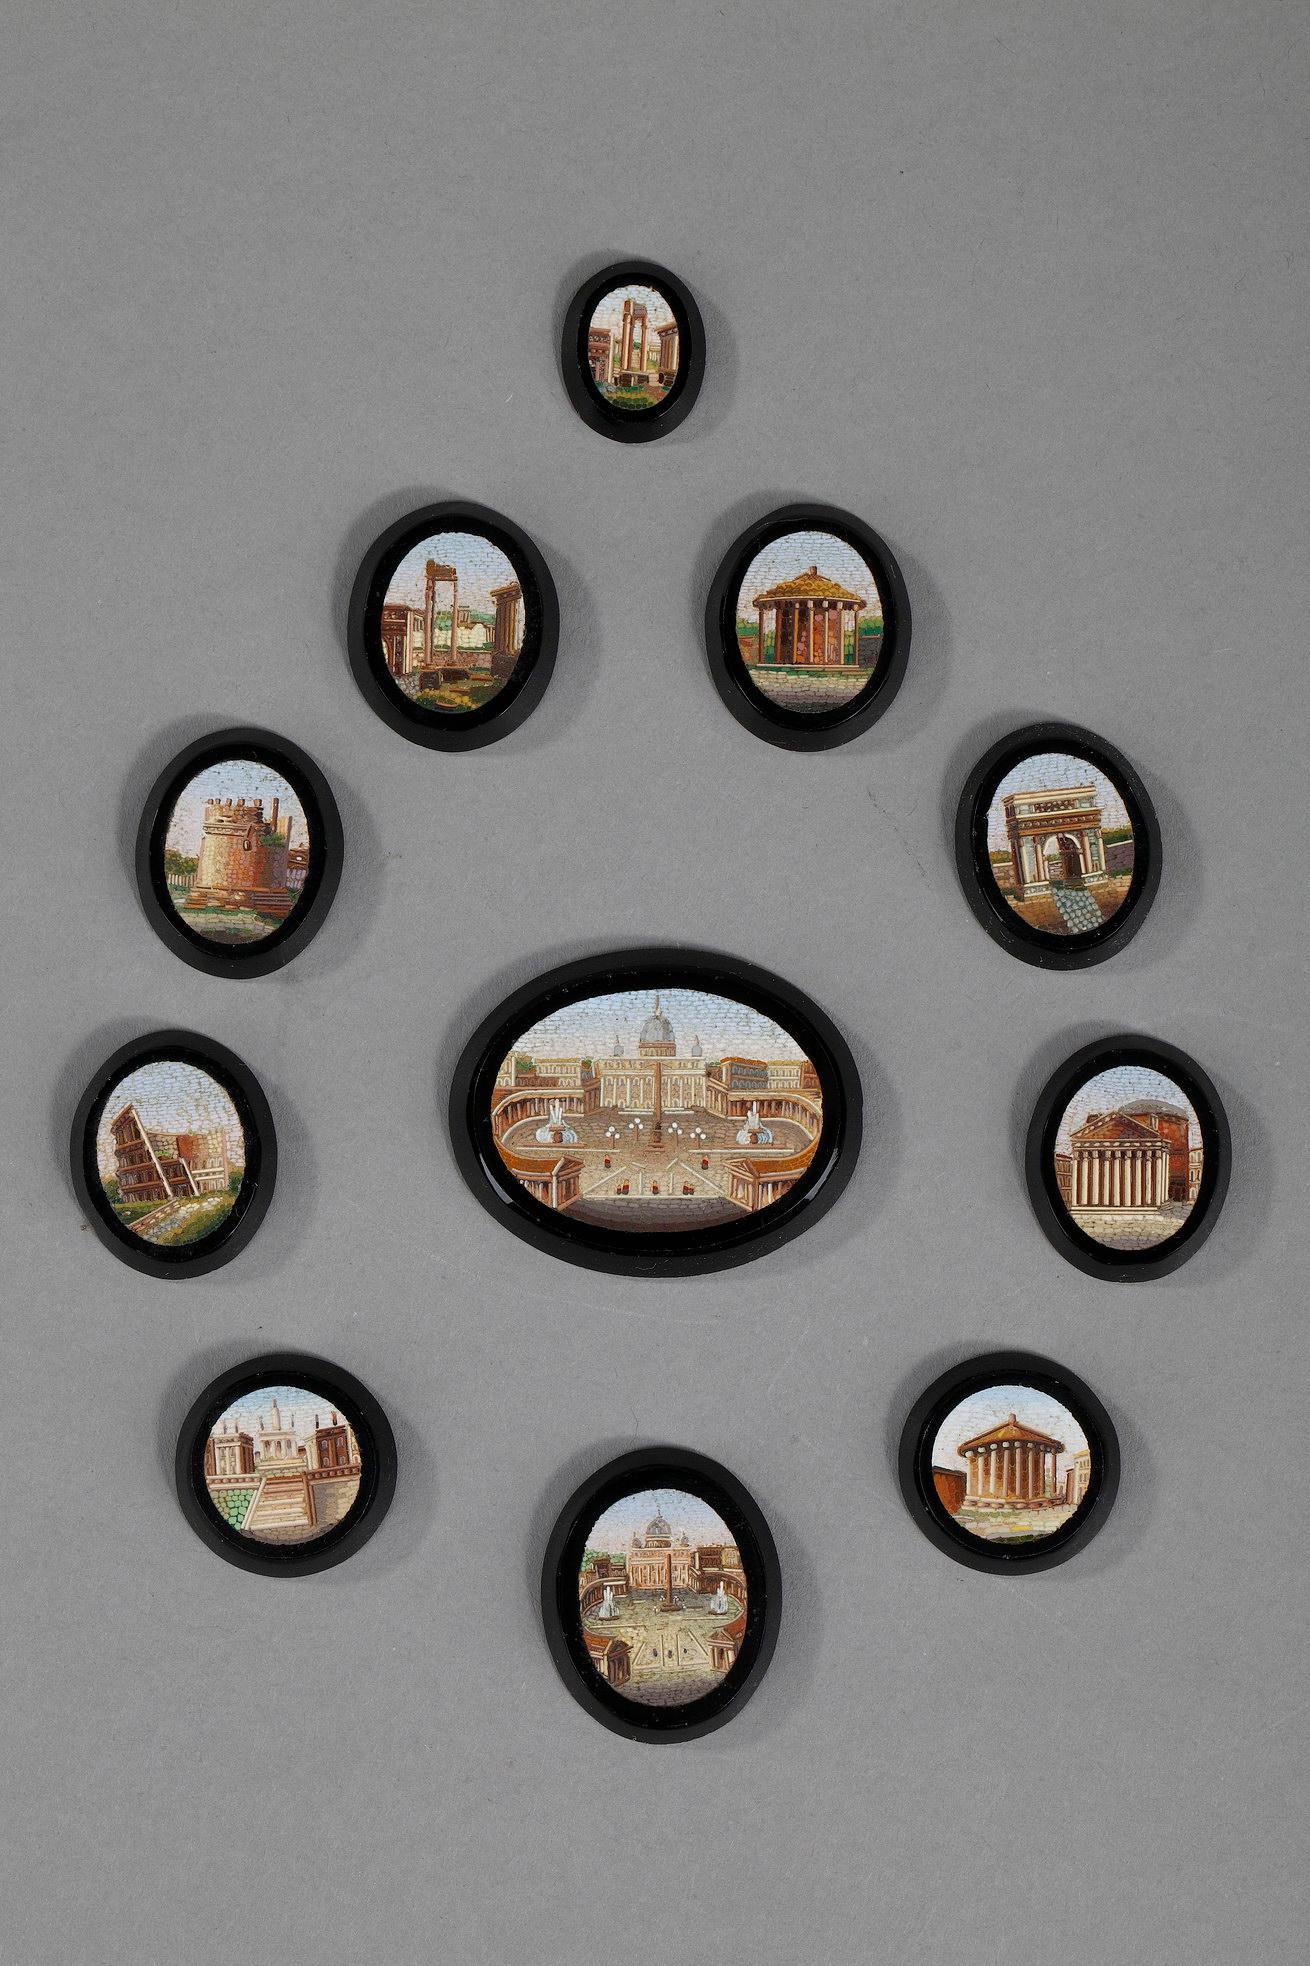 Set of 11 Empire micro-mosaics on black stone, round, oval or drop-shaped. They represent Roman buildings, such as the Pantheon, the temple of Vesta, or Saint-Pierre. 

Dim of the largest : 4,4cm x 3,5cm x 0,4cm
Dim of the middle ones : 2,7cm x